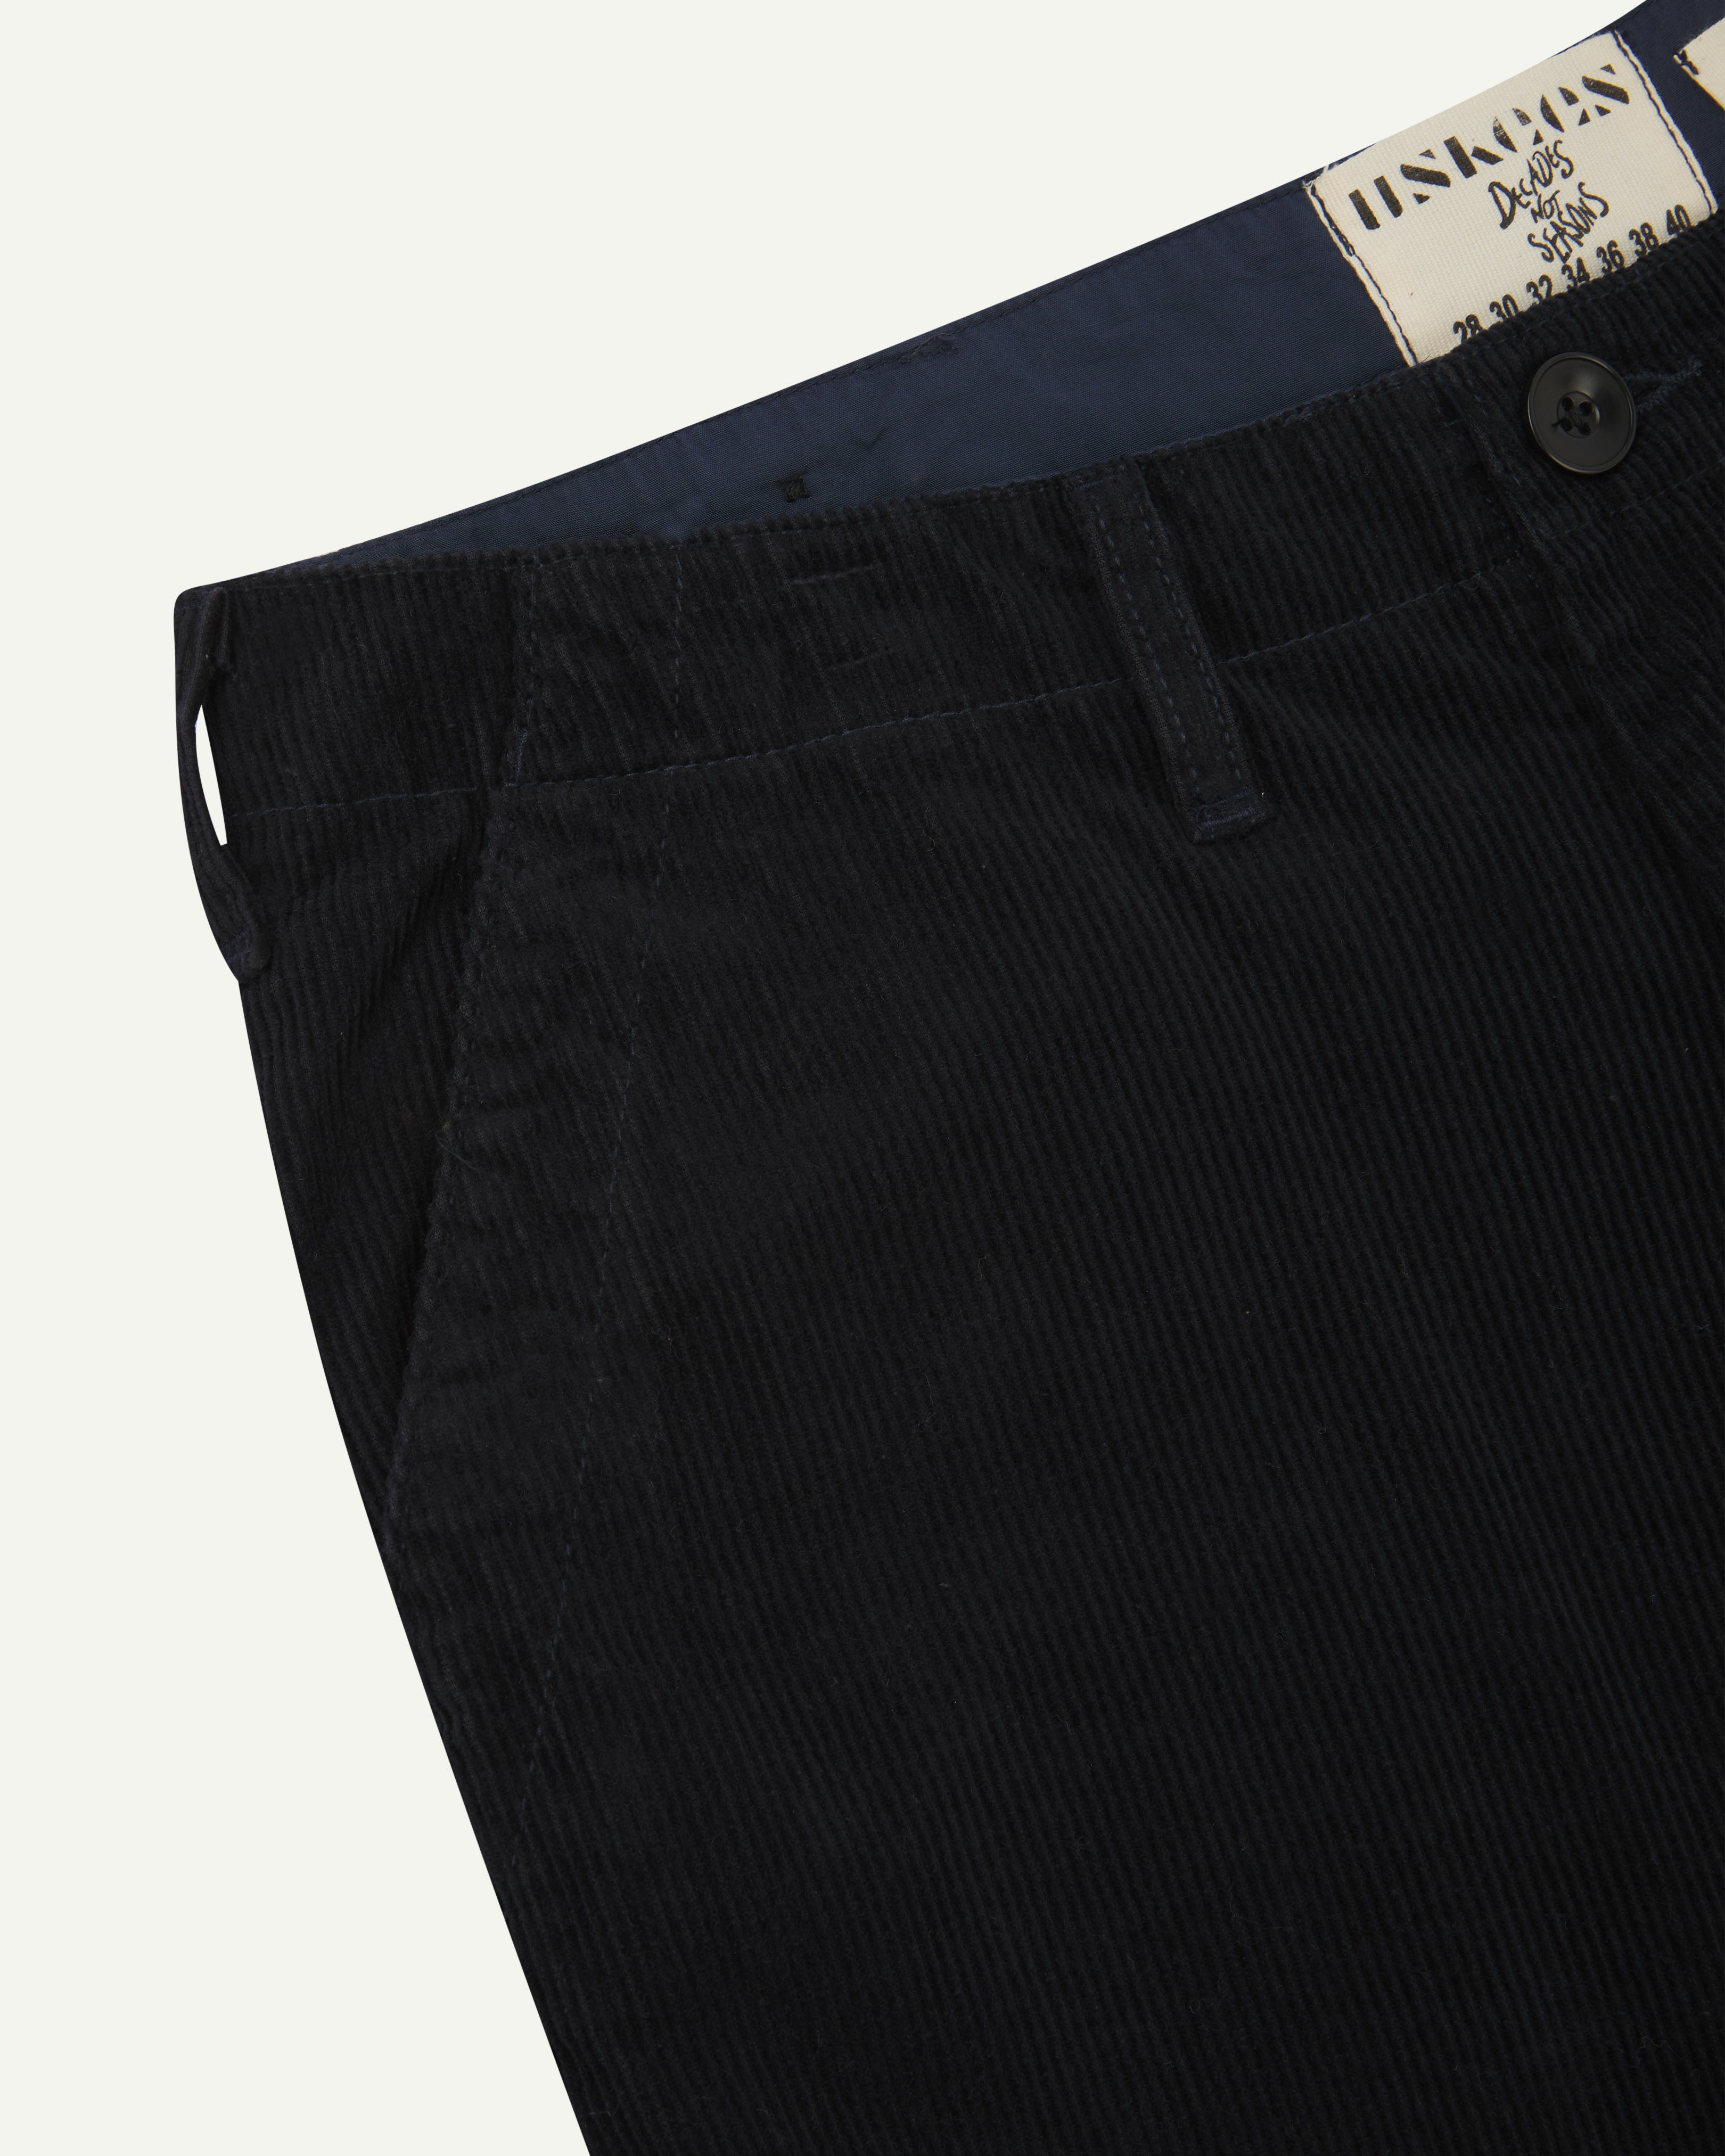 Close-up view of #5005 Uskees cord workwear pants in midnight blue showing triple stitching